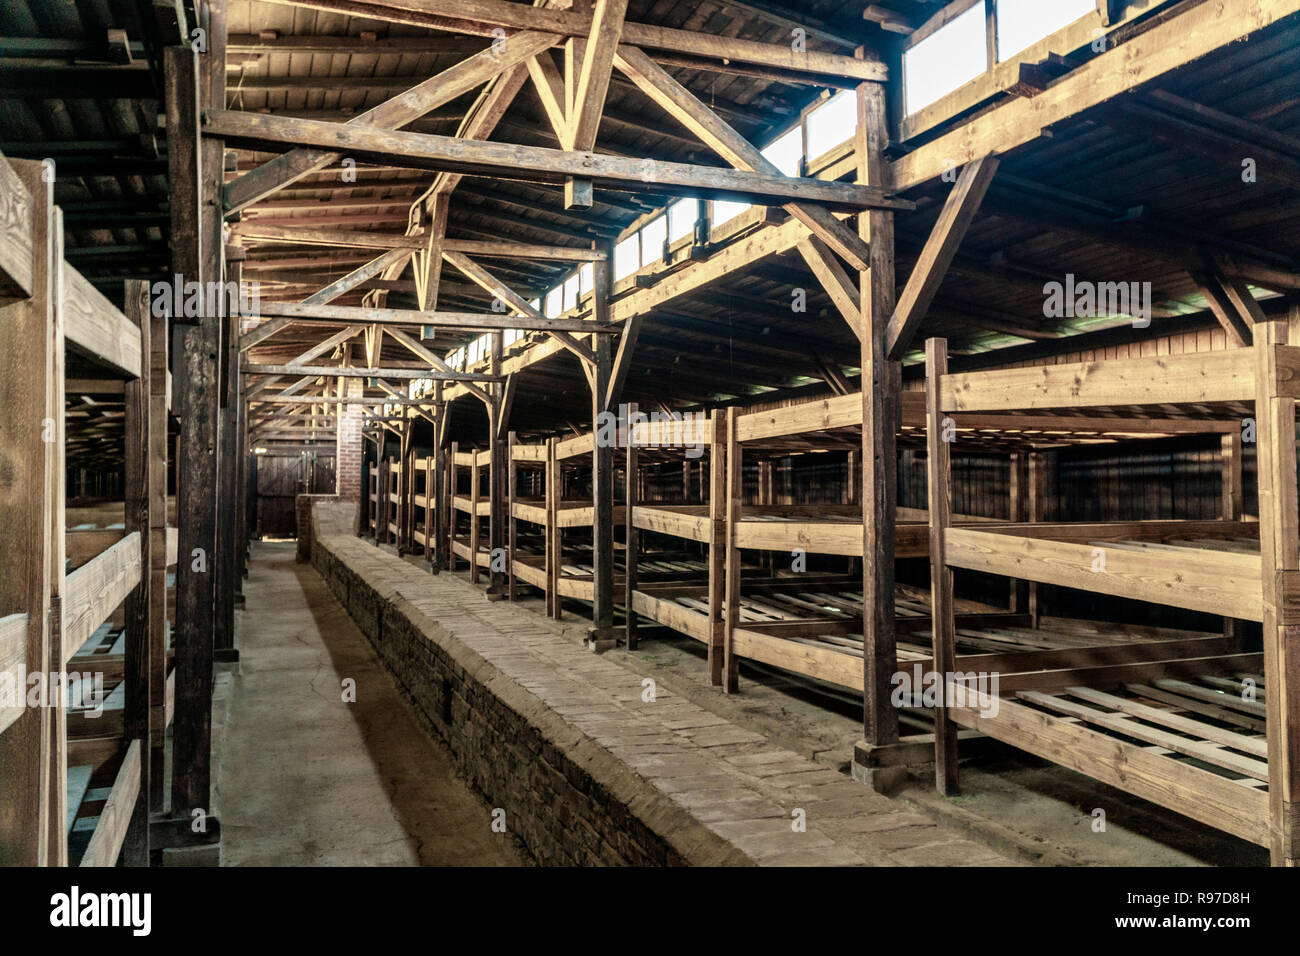 Wooden bunk beds in a barrack in Auschwitz - Birkenau Concentration Camp,  Poland Stock Photo - Alamy